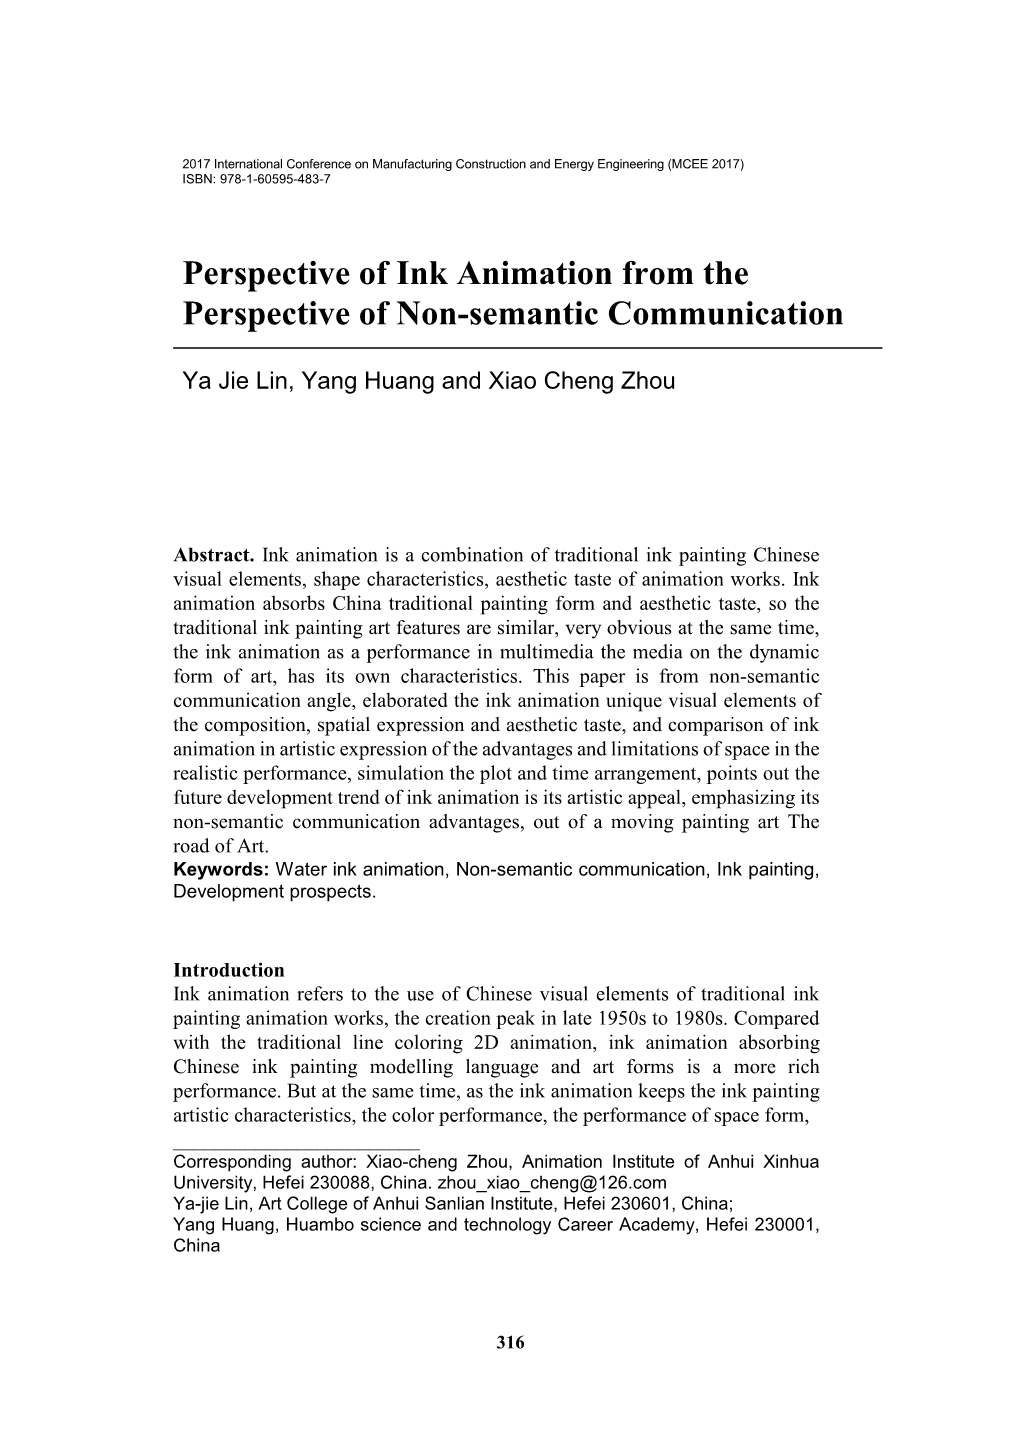 Perspective of Ink Animation from the Perspective of Non-Semantic Communication